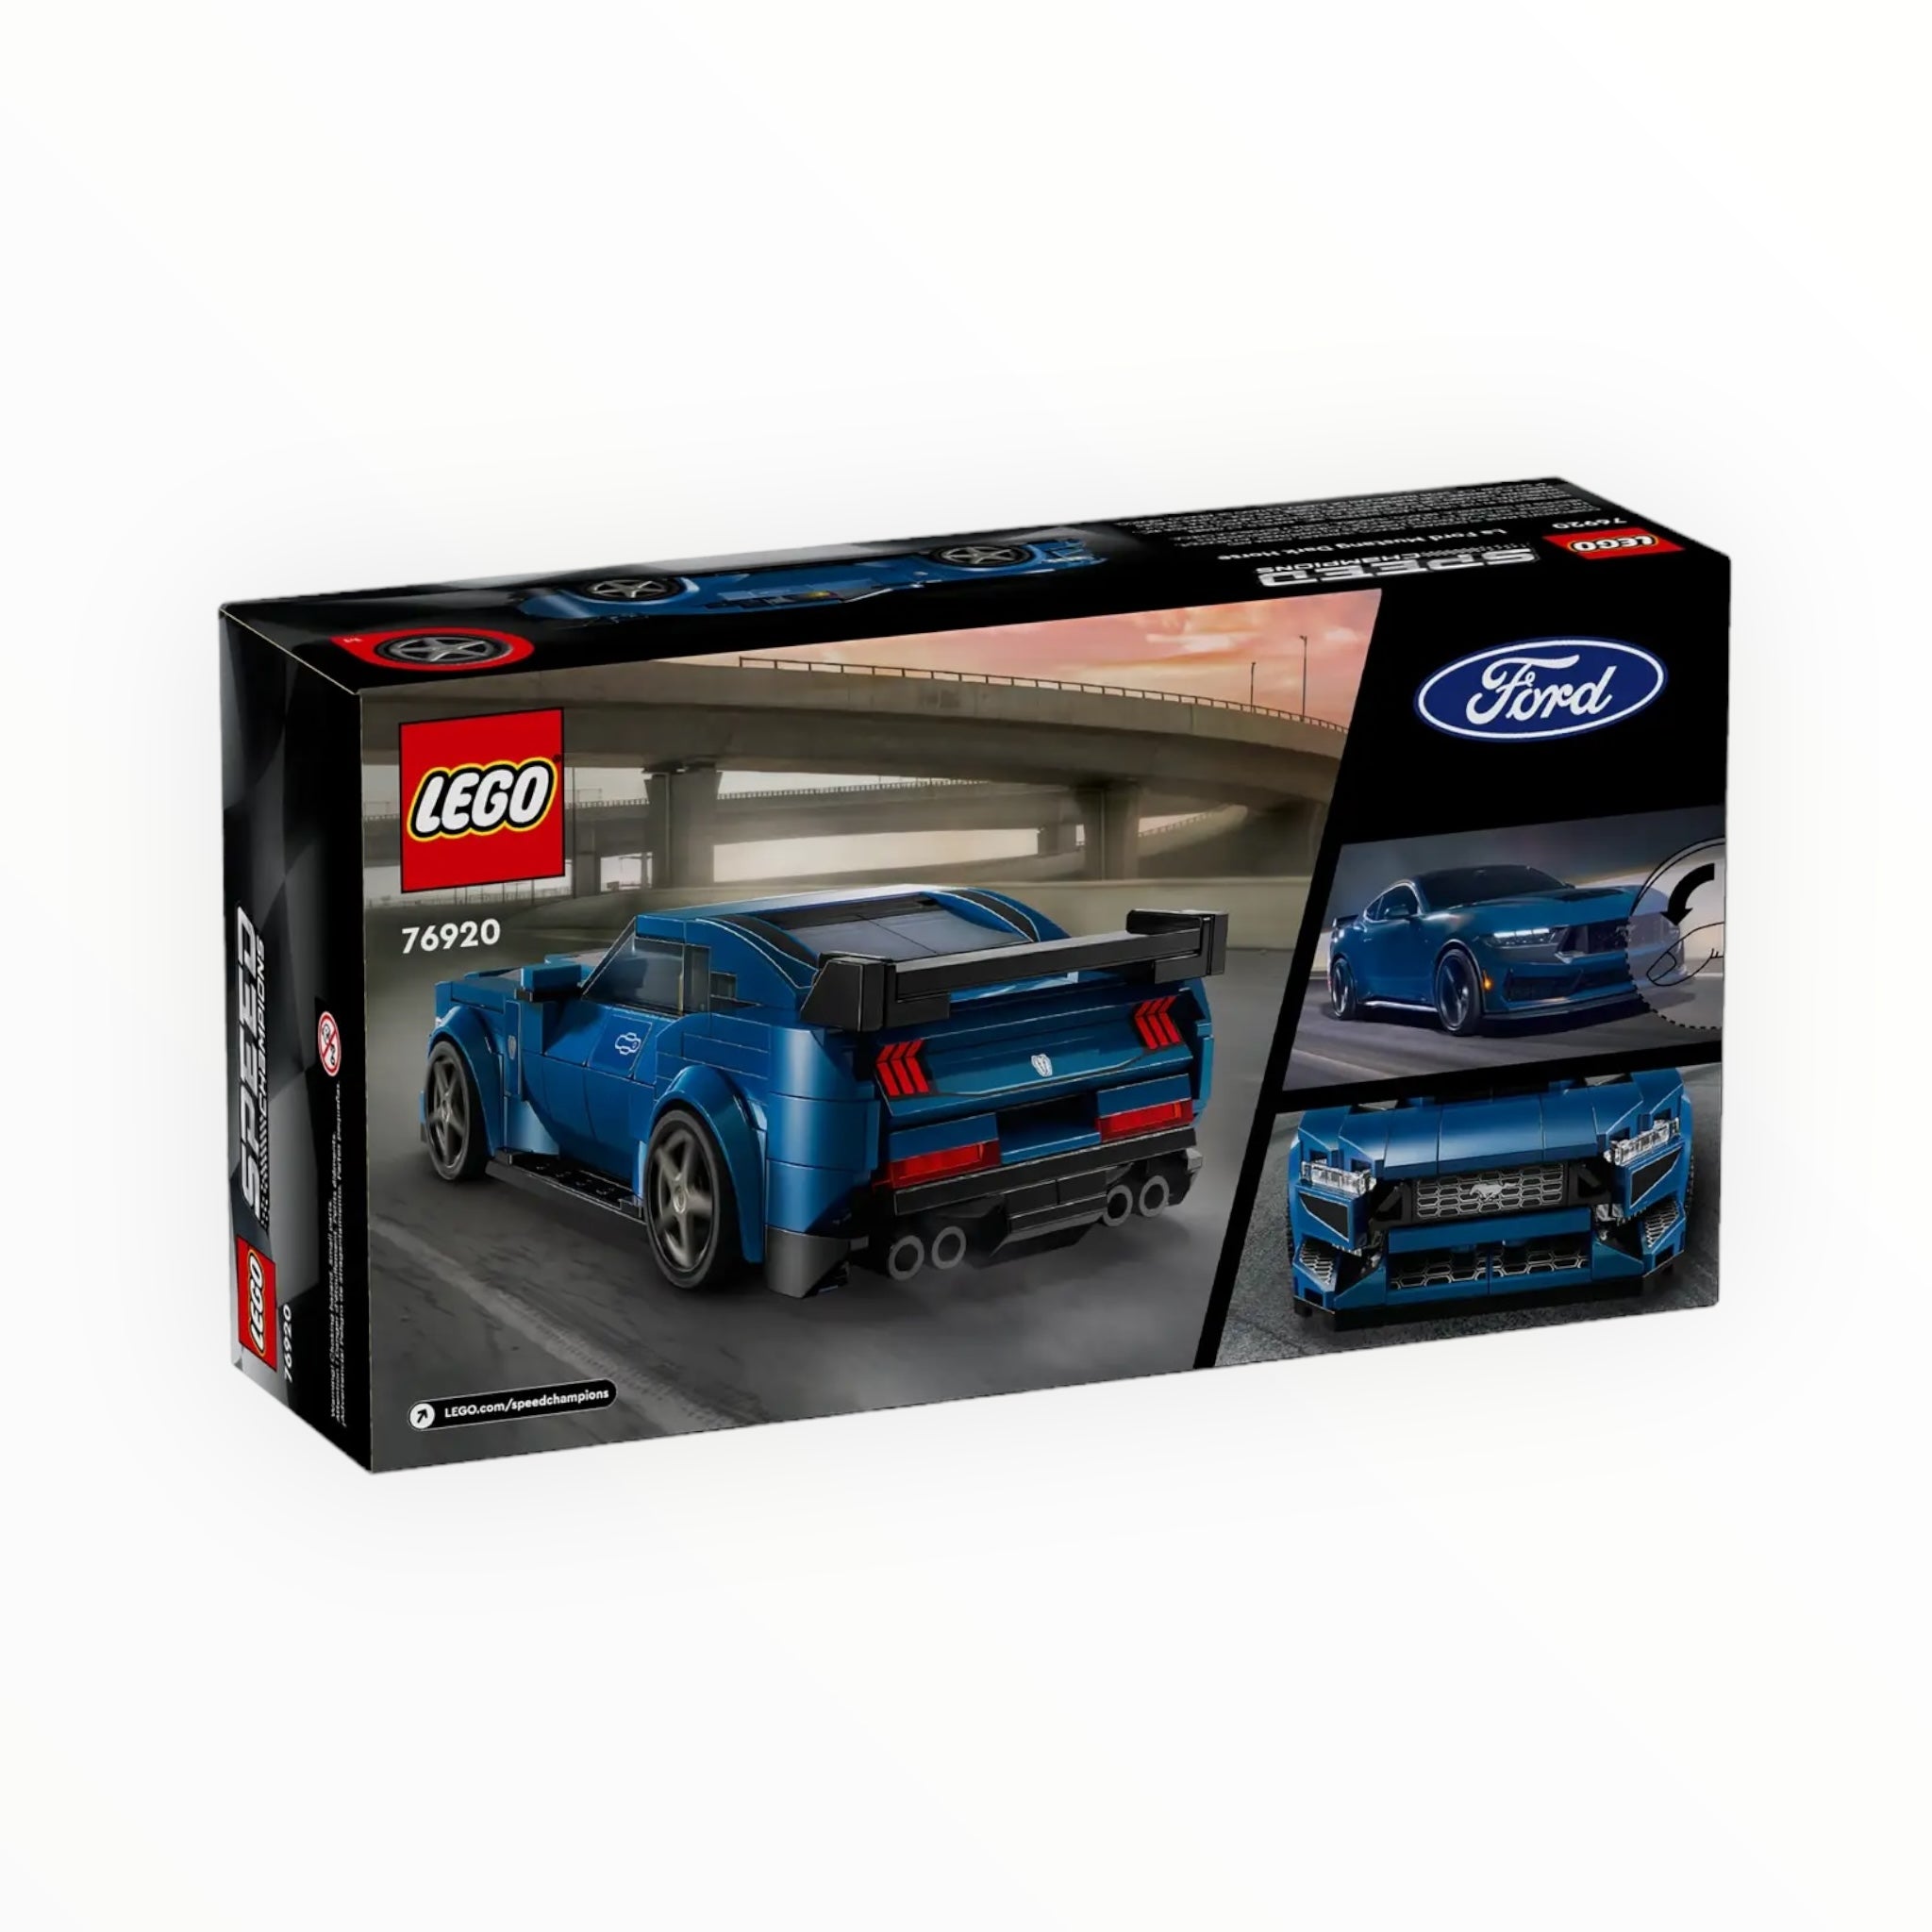 76920 Speed Champions Ford Mustang Dark Horse Sports Car